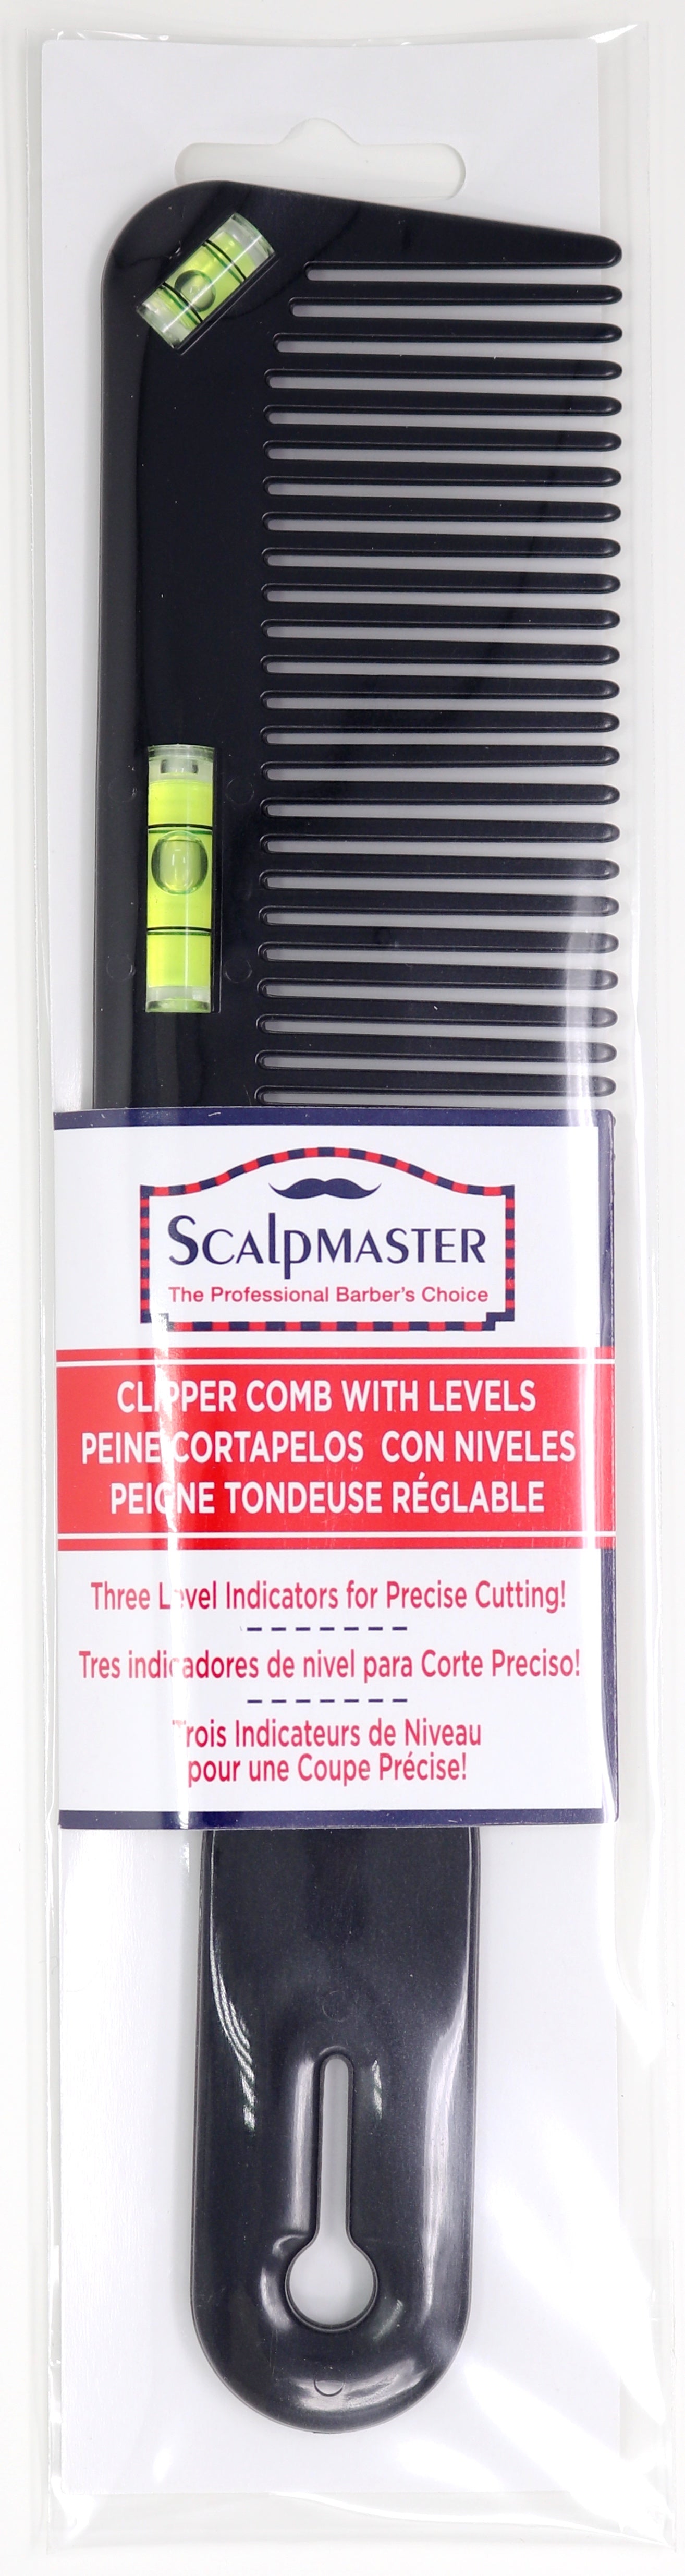 Scalpmaster Clipper Comb With Level Blending Flat Top Guide Hair Comb Barber Cutting Barber Wide Tooth Comb Styling Black 2 Pc.